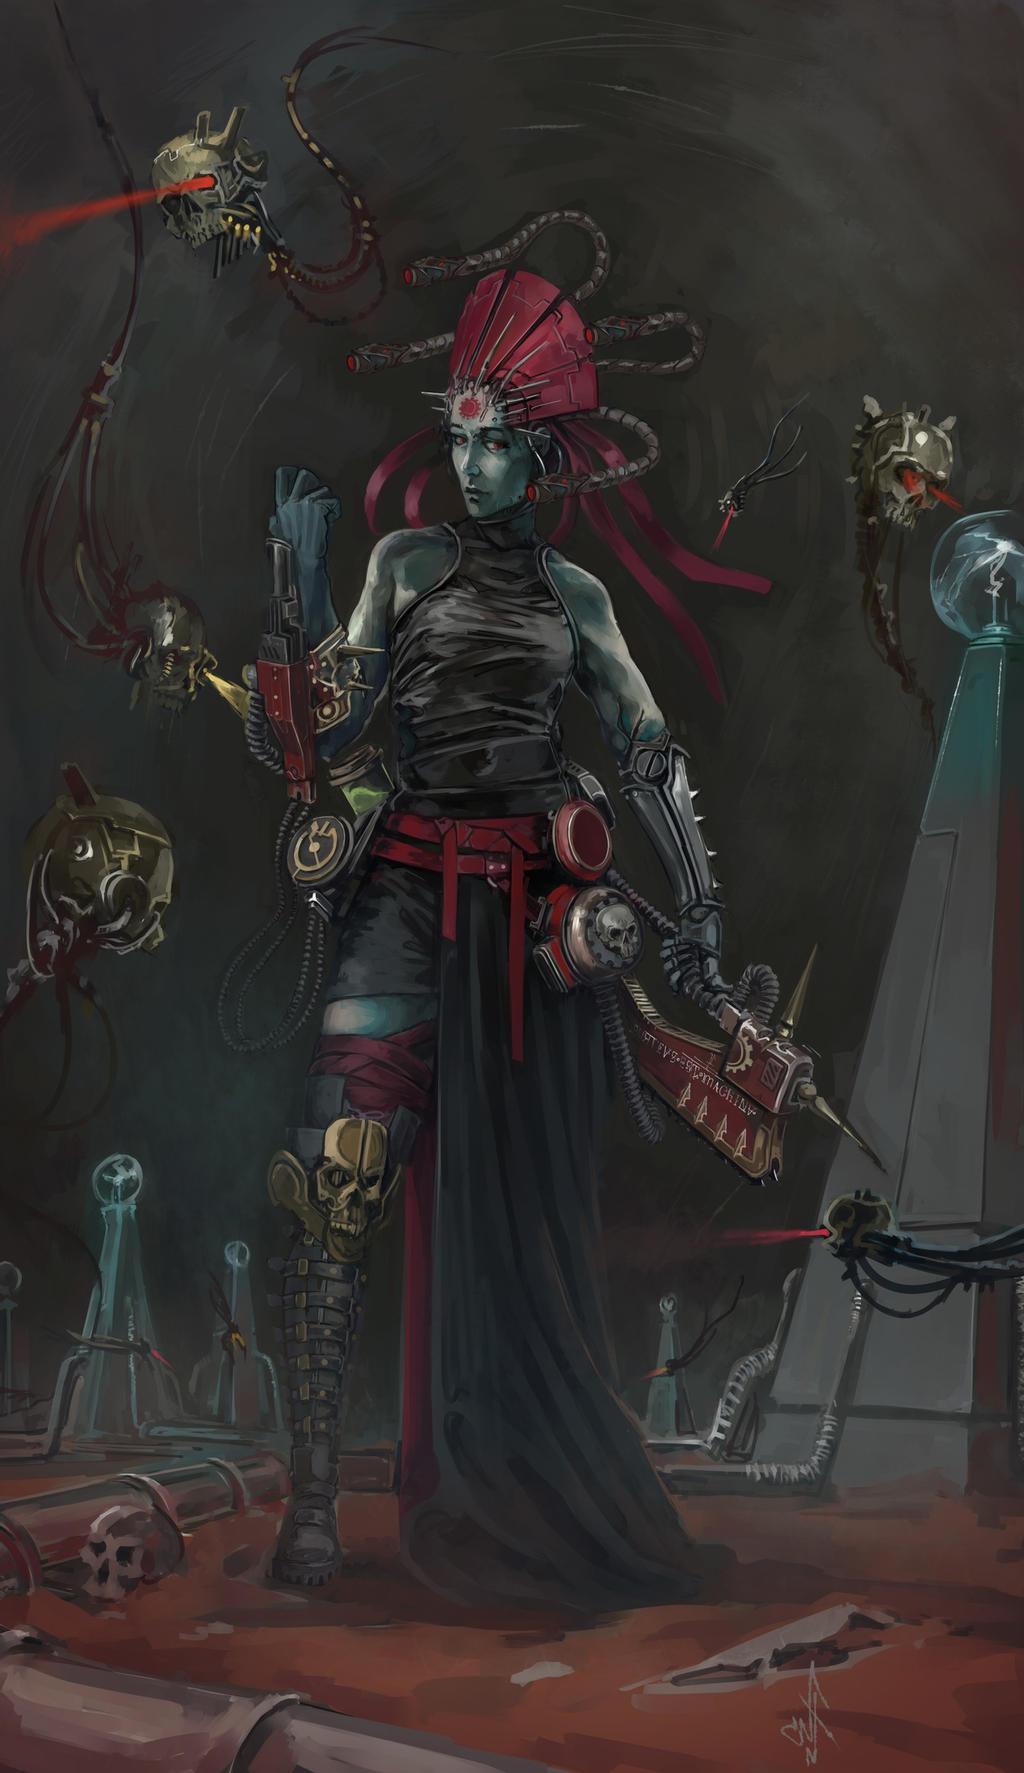 Koriel zeth standing and posing with weapons